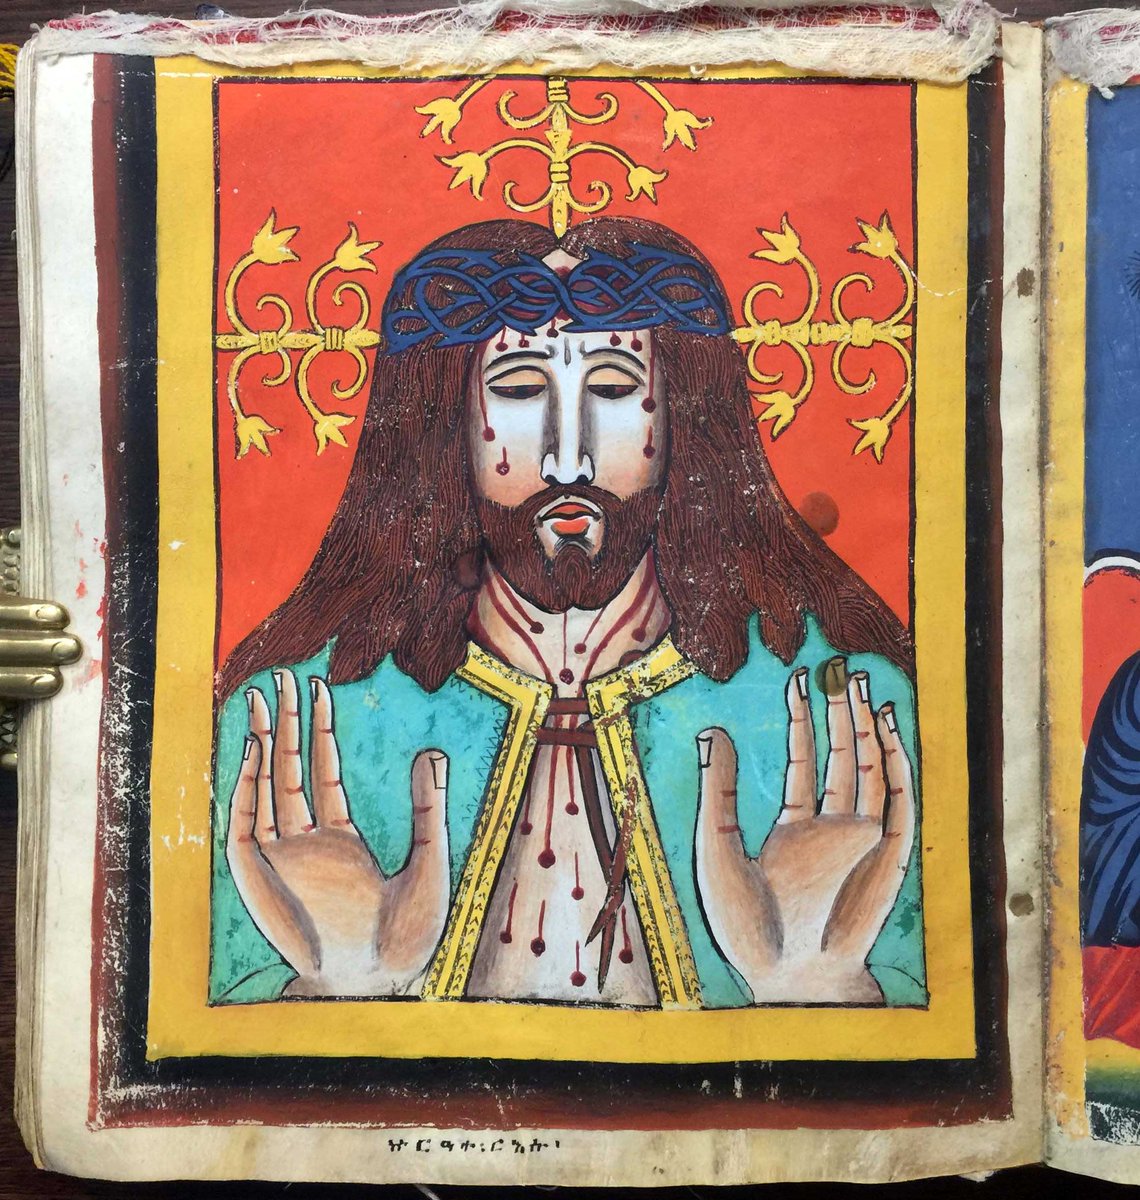 Copes of the Kwer'ata Re'esu icon are ubiquitous in early Ethiopian art - here is one painted in the so-called Second Gondarene style in a late 17th century manuscript. 3/10